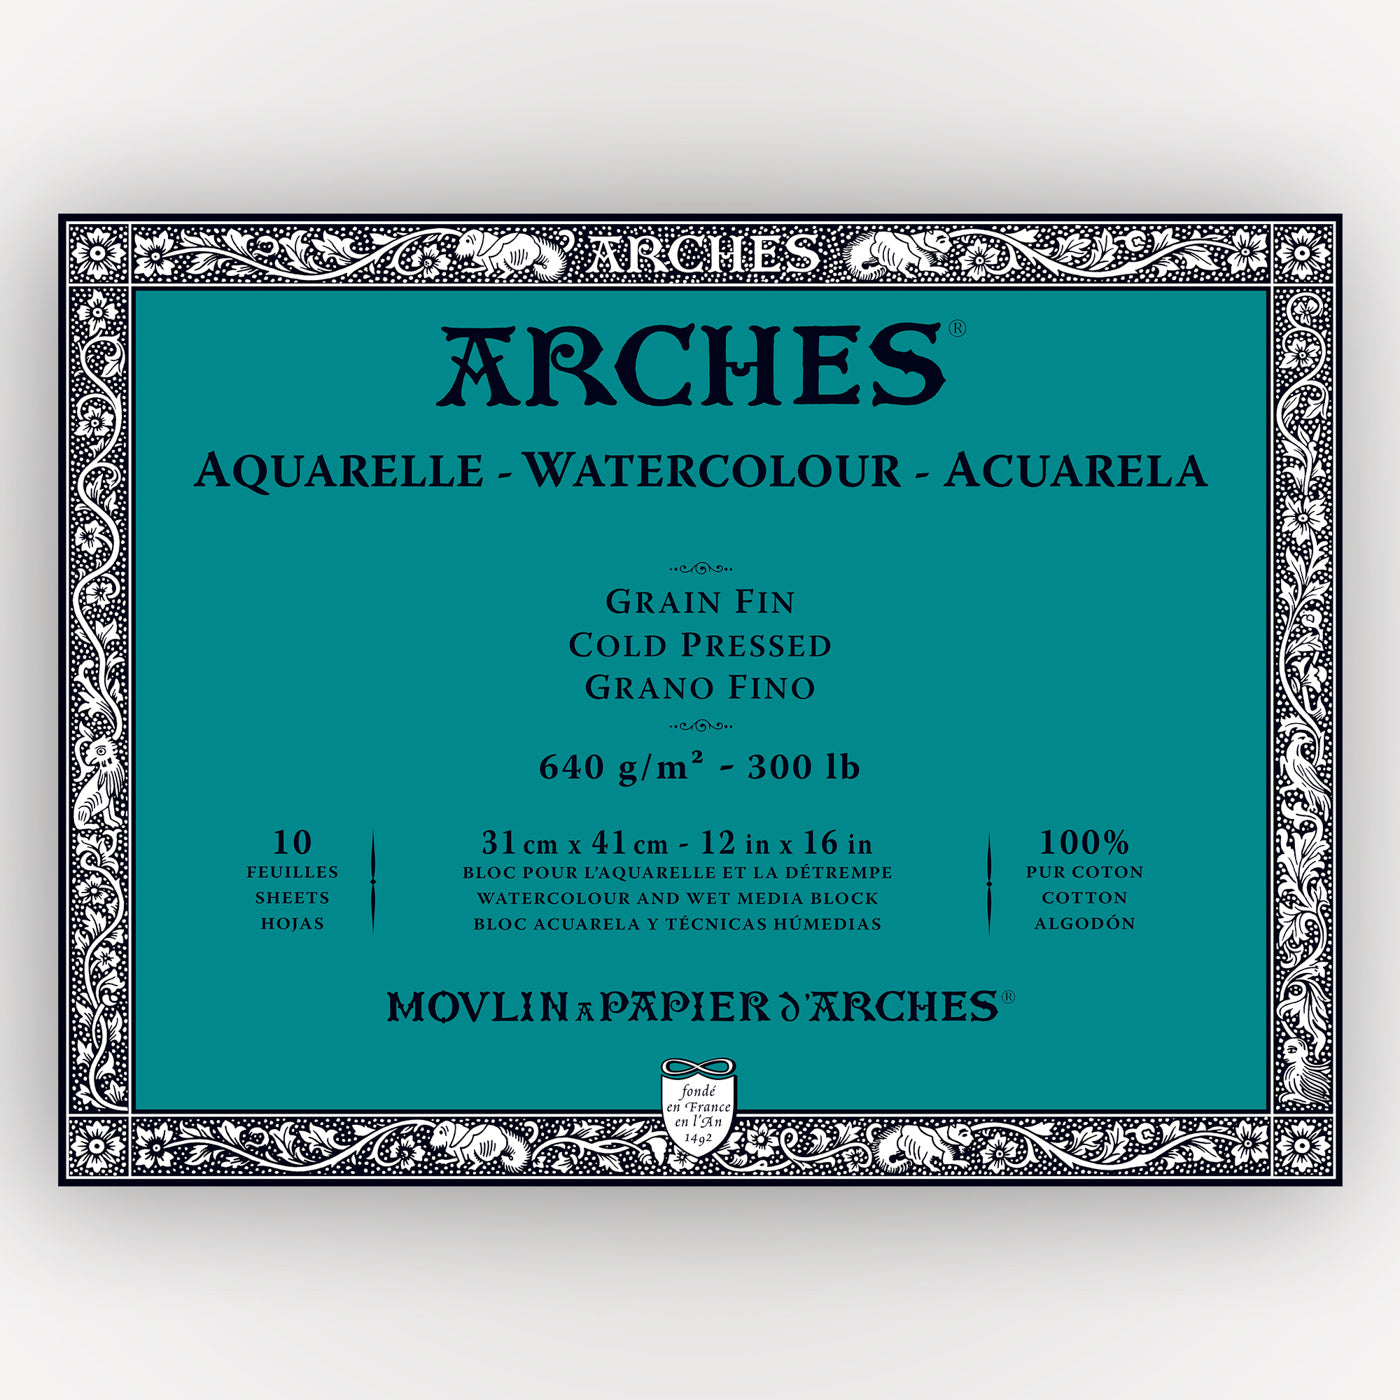 Arches Cold Pressed 640gms 10 sheets 31 x 41 cm